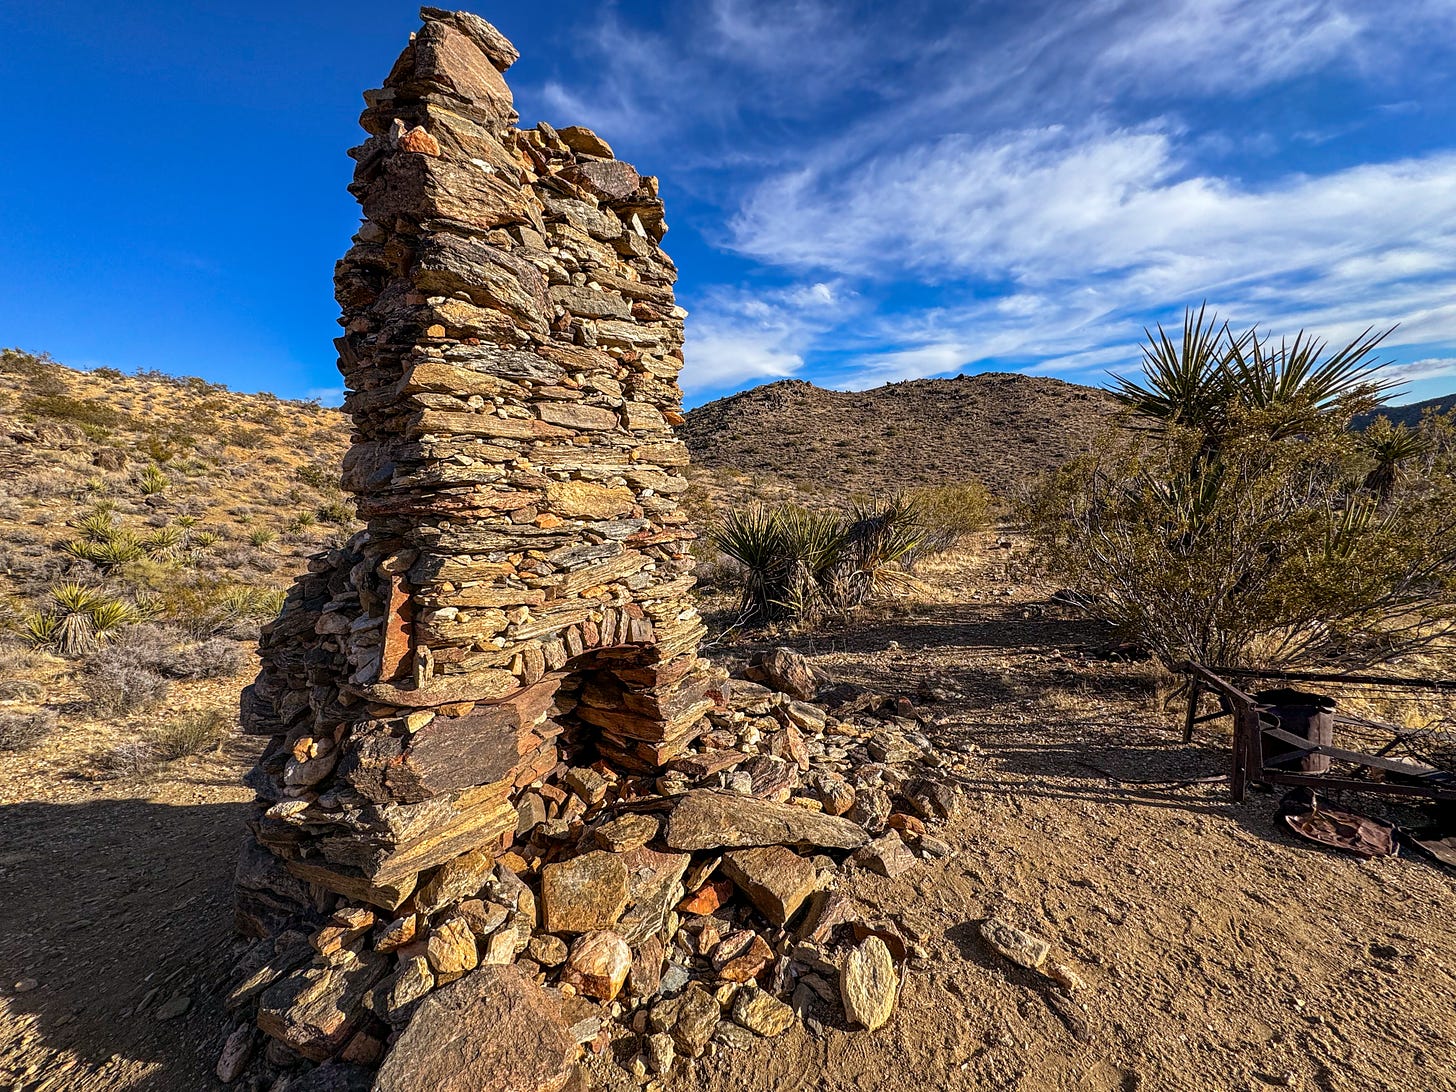 A stone fireplace rises from the desert floor without any structure around it. A Mojave yucca is directly behind it, and two small hills are further out.